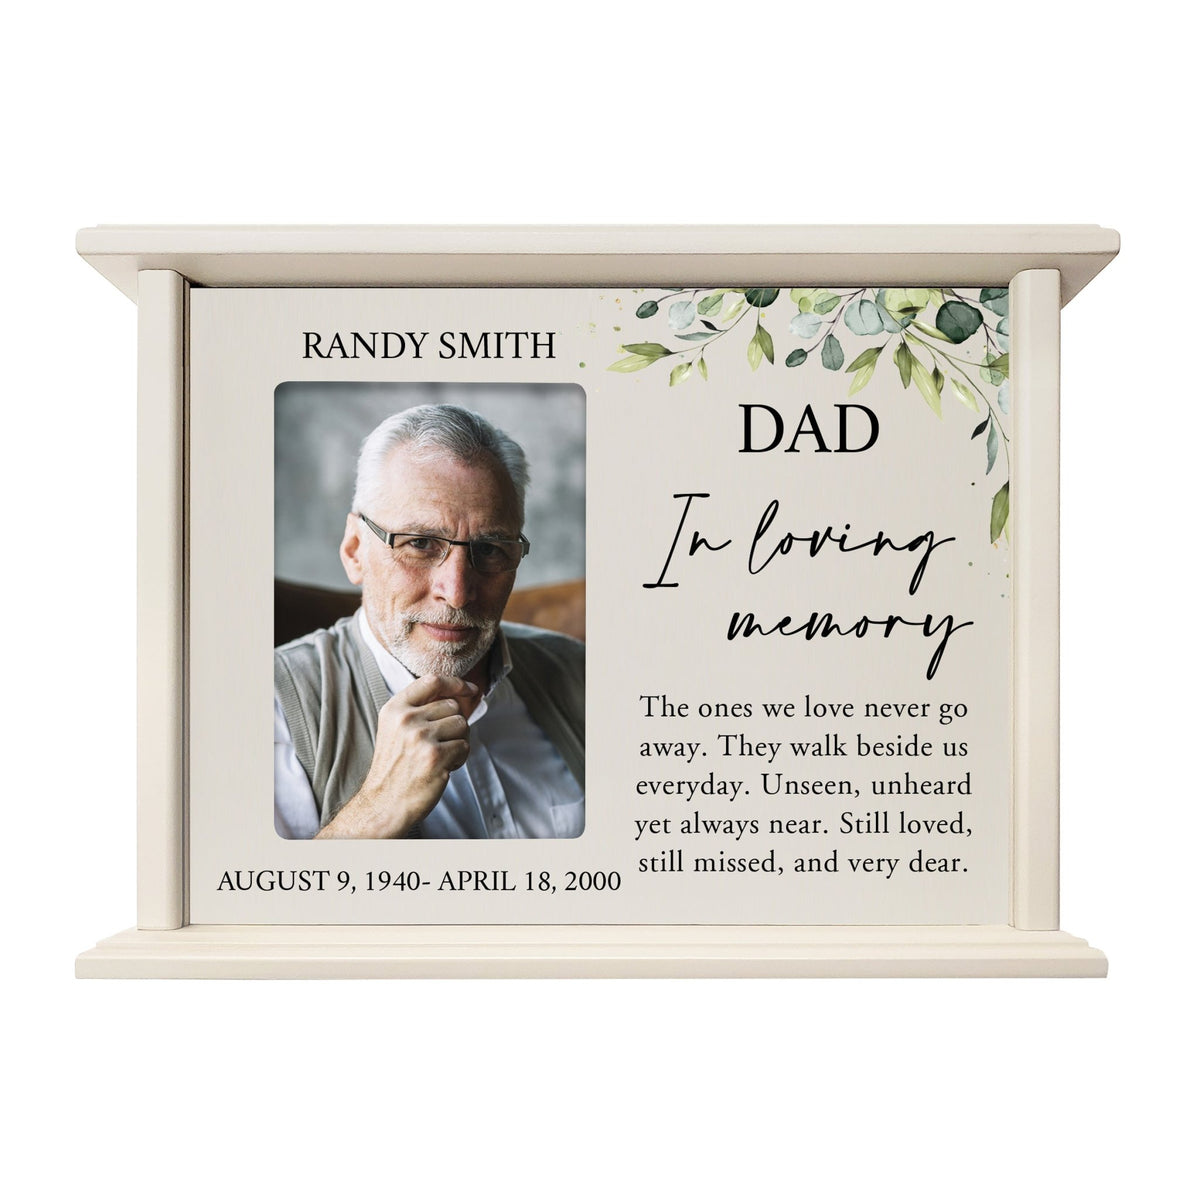 Personalized Memorial Cherry Wood 12 x 4.5 x 9 Cremation Urn Box with Picture Frame holds 200 cu in of Human Ashes and 4x6 Photo - In Loving Memory (Ivory) - LifeSong Milestones